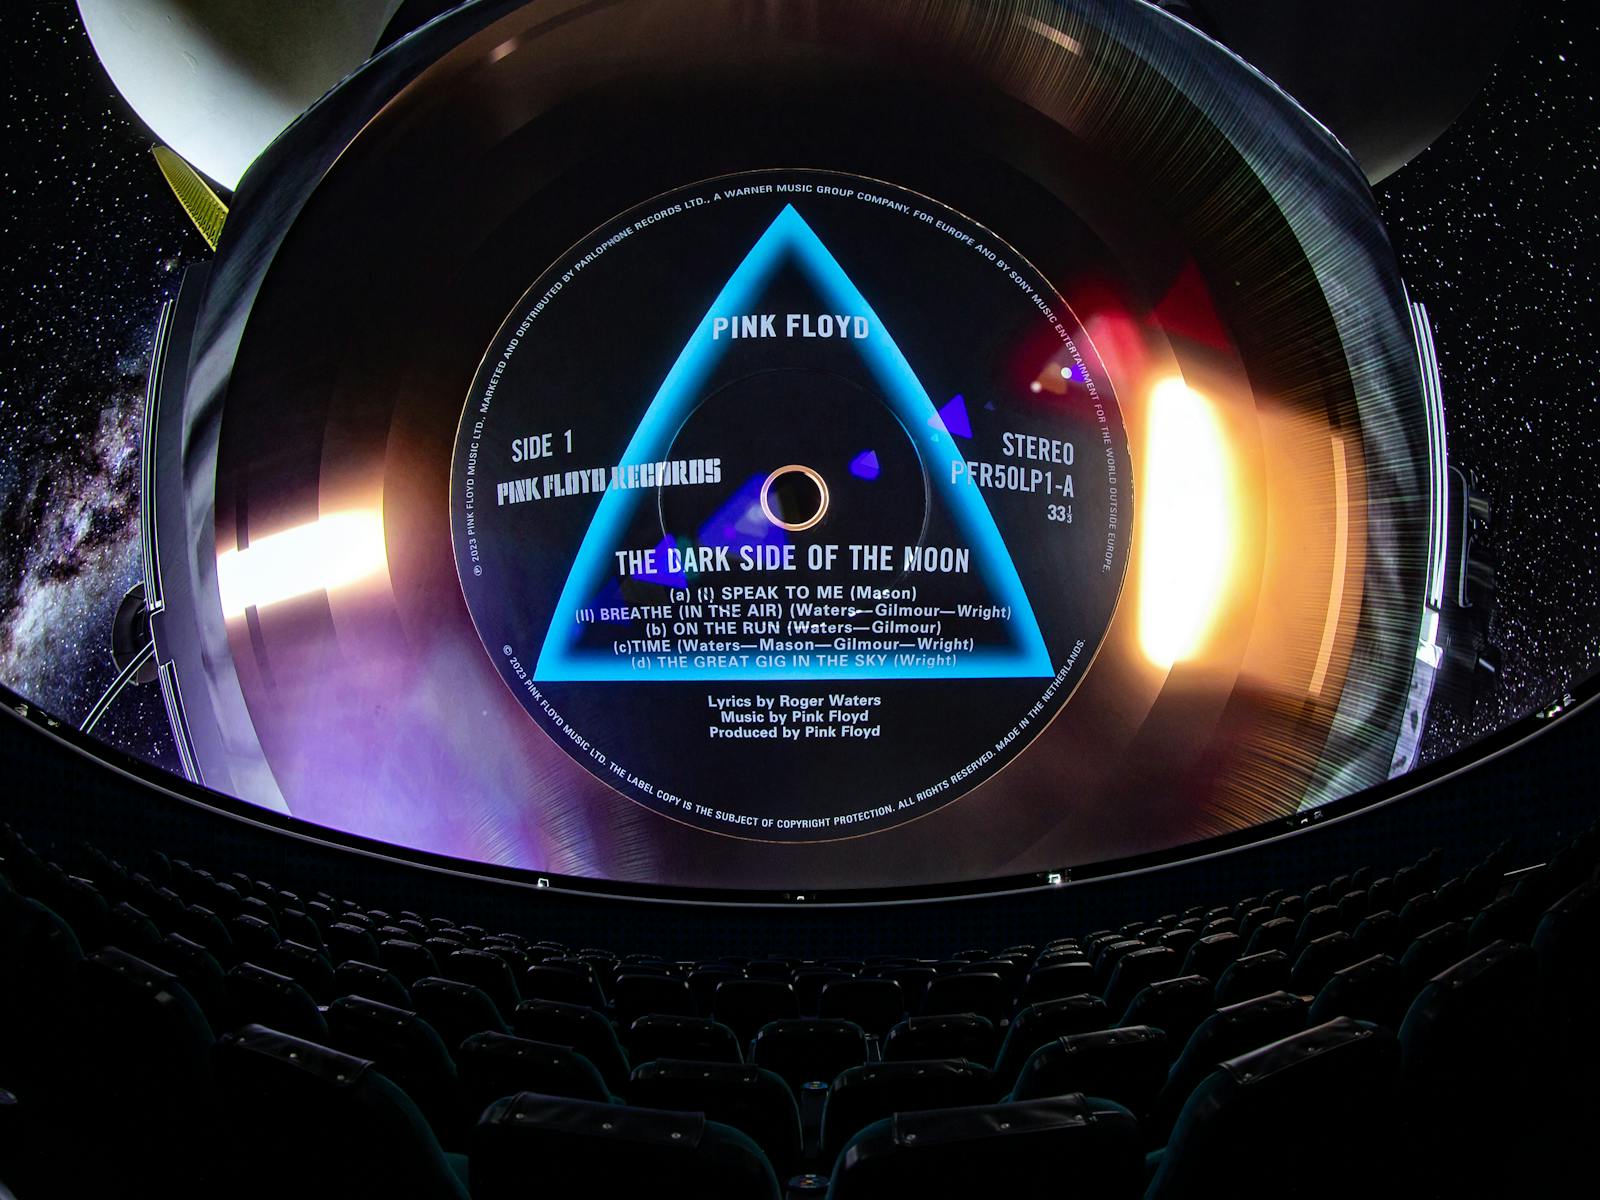 Image from the Dark Side of the Moon planetarium show, depicting the record's cover image.